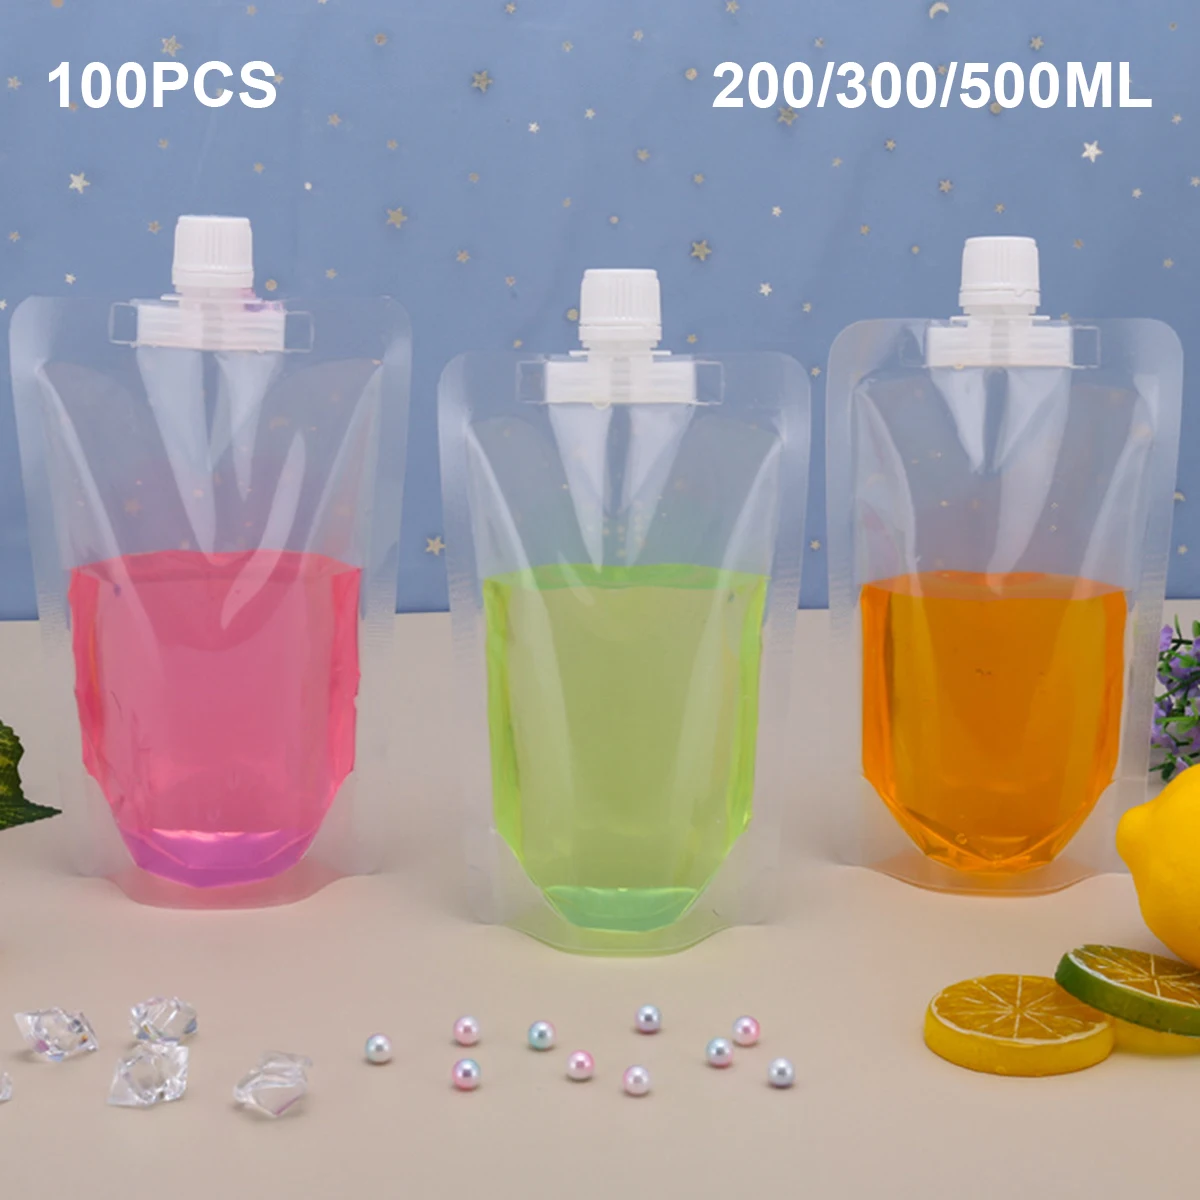 

100 Pcs Drink Pouches Transparent Stand Up Drink Bag Juice Sealed Bag Milk Spouted Drink Bags Drink Pouch Packaging Bag Clear